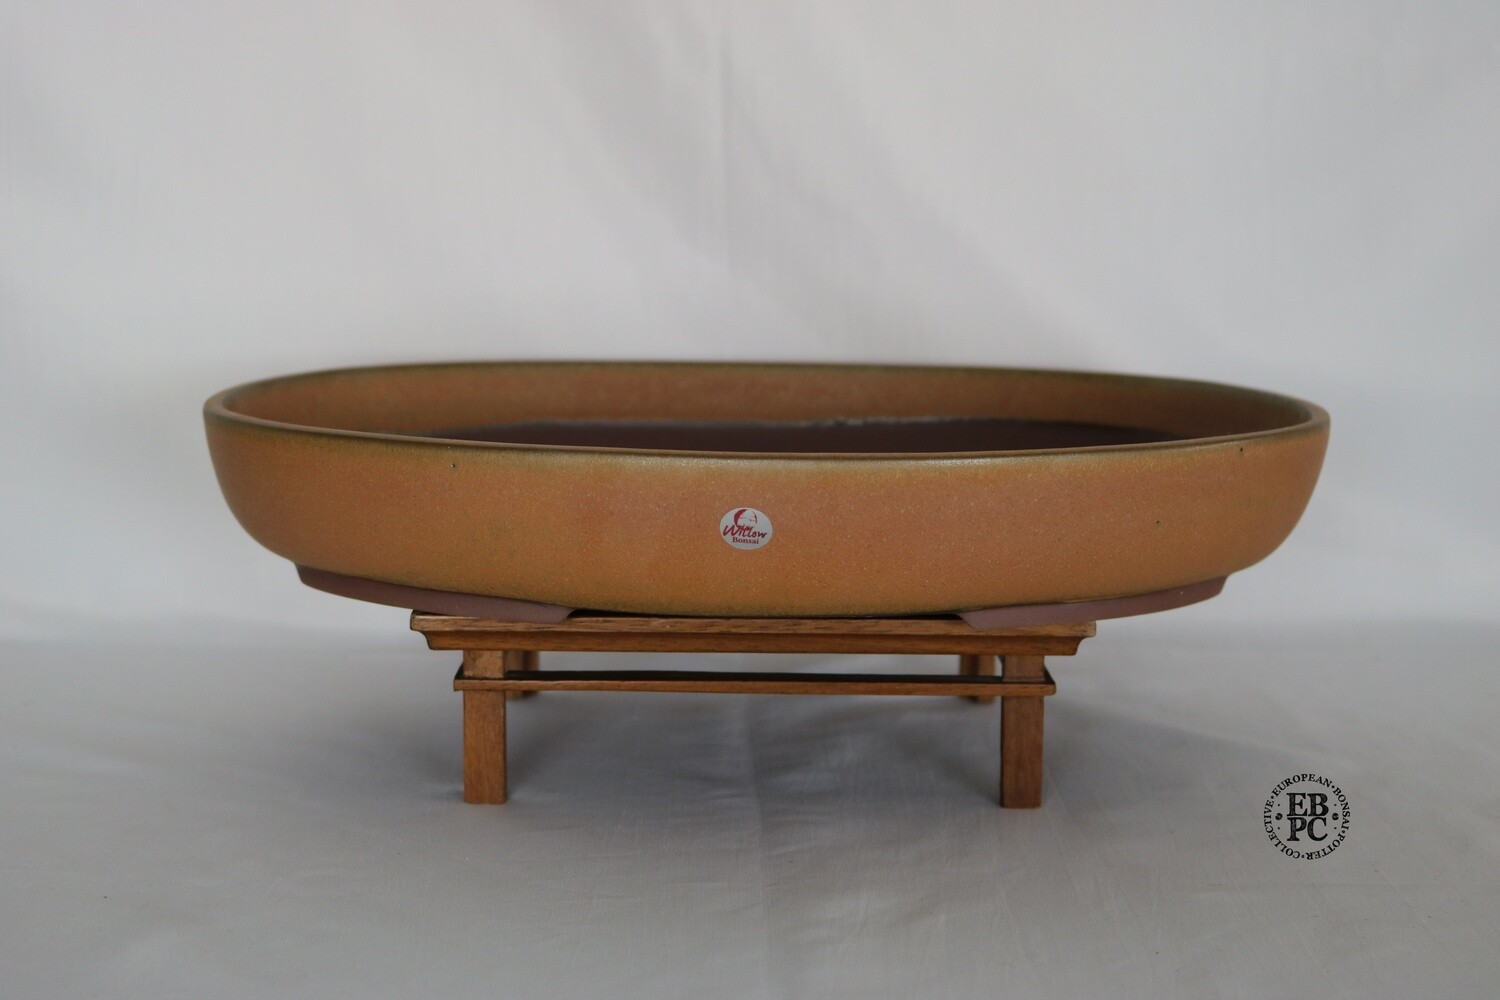 Willow Bonsai Pots. 34.7cm; Oval; Deep Stone Glaze; Browns; Recessed Feet; Made in South Africa.